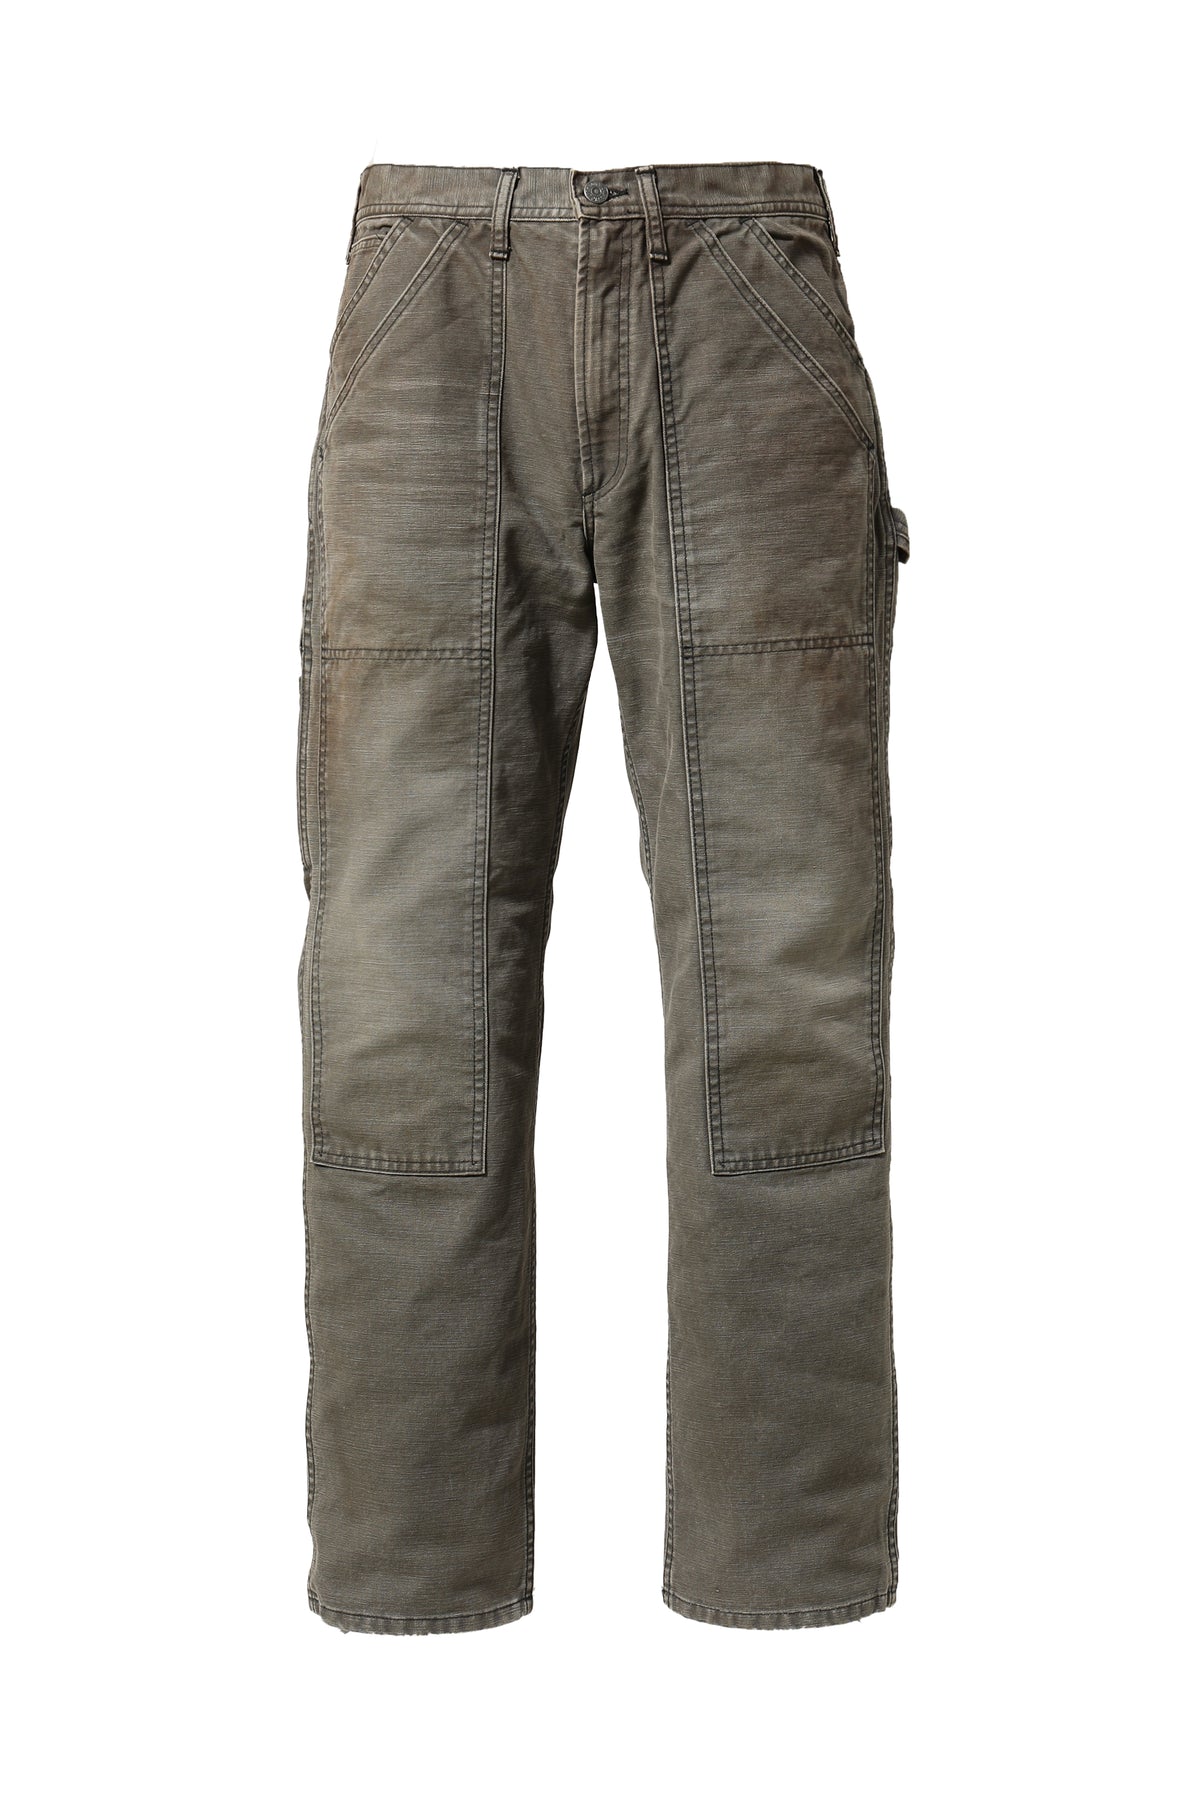 DOUBLE KNEE DUCK PAINTER PANTS AGEING (EXCLUSIVE) / OLIVE AGEING